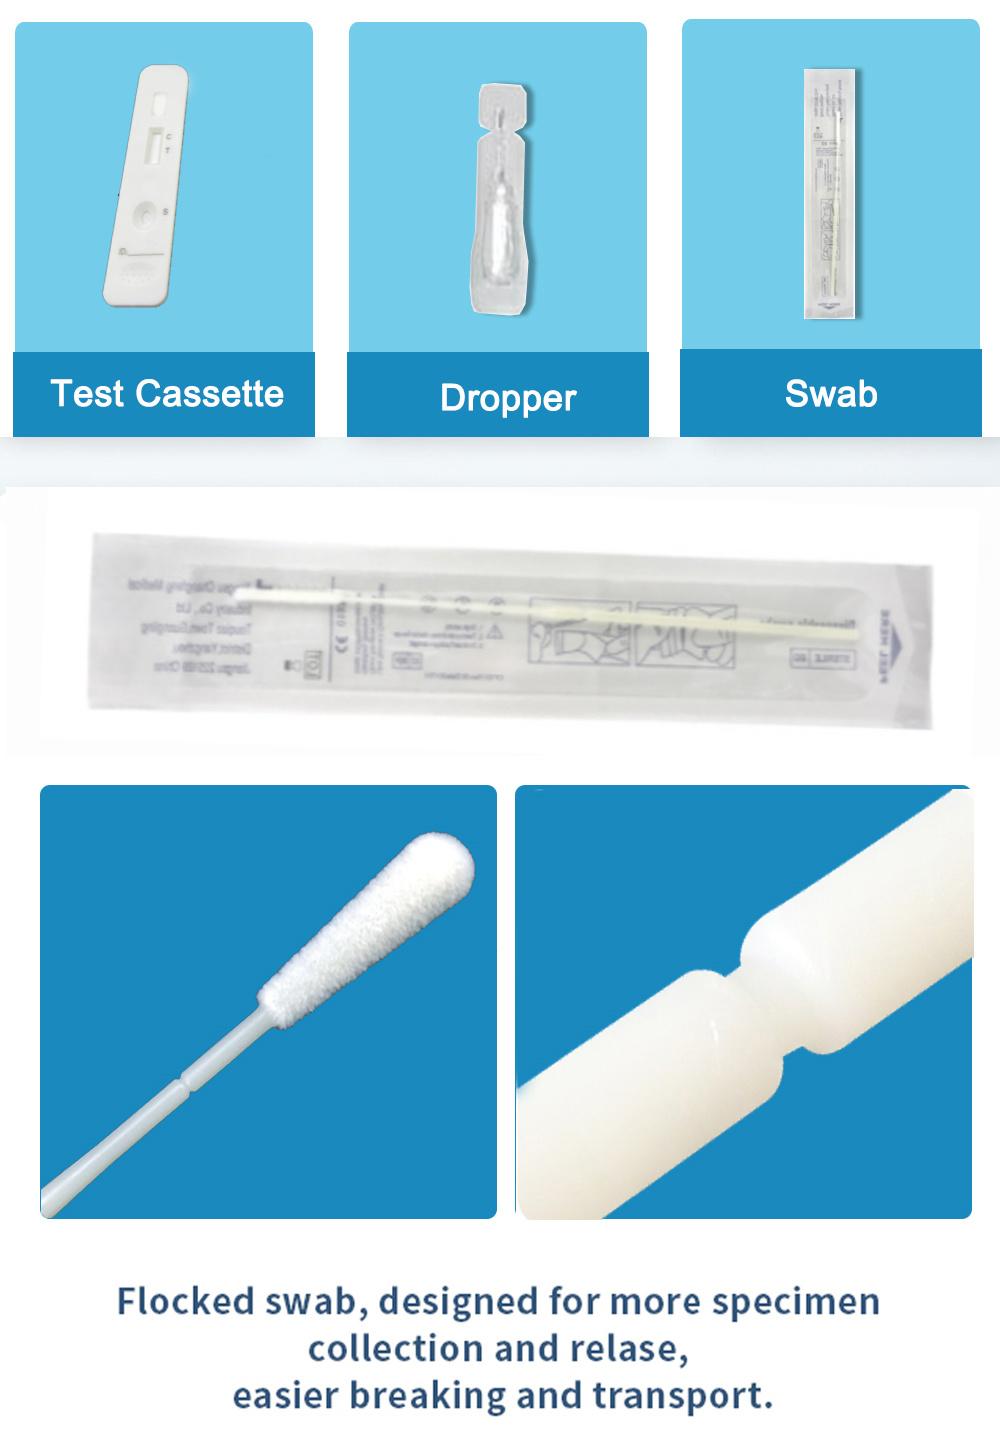 Rapid Test Kit Factory Price Test Self-Test at Home